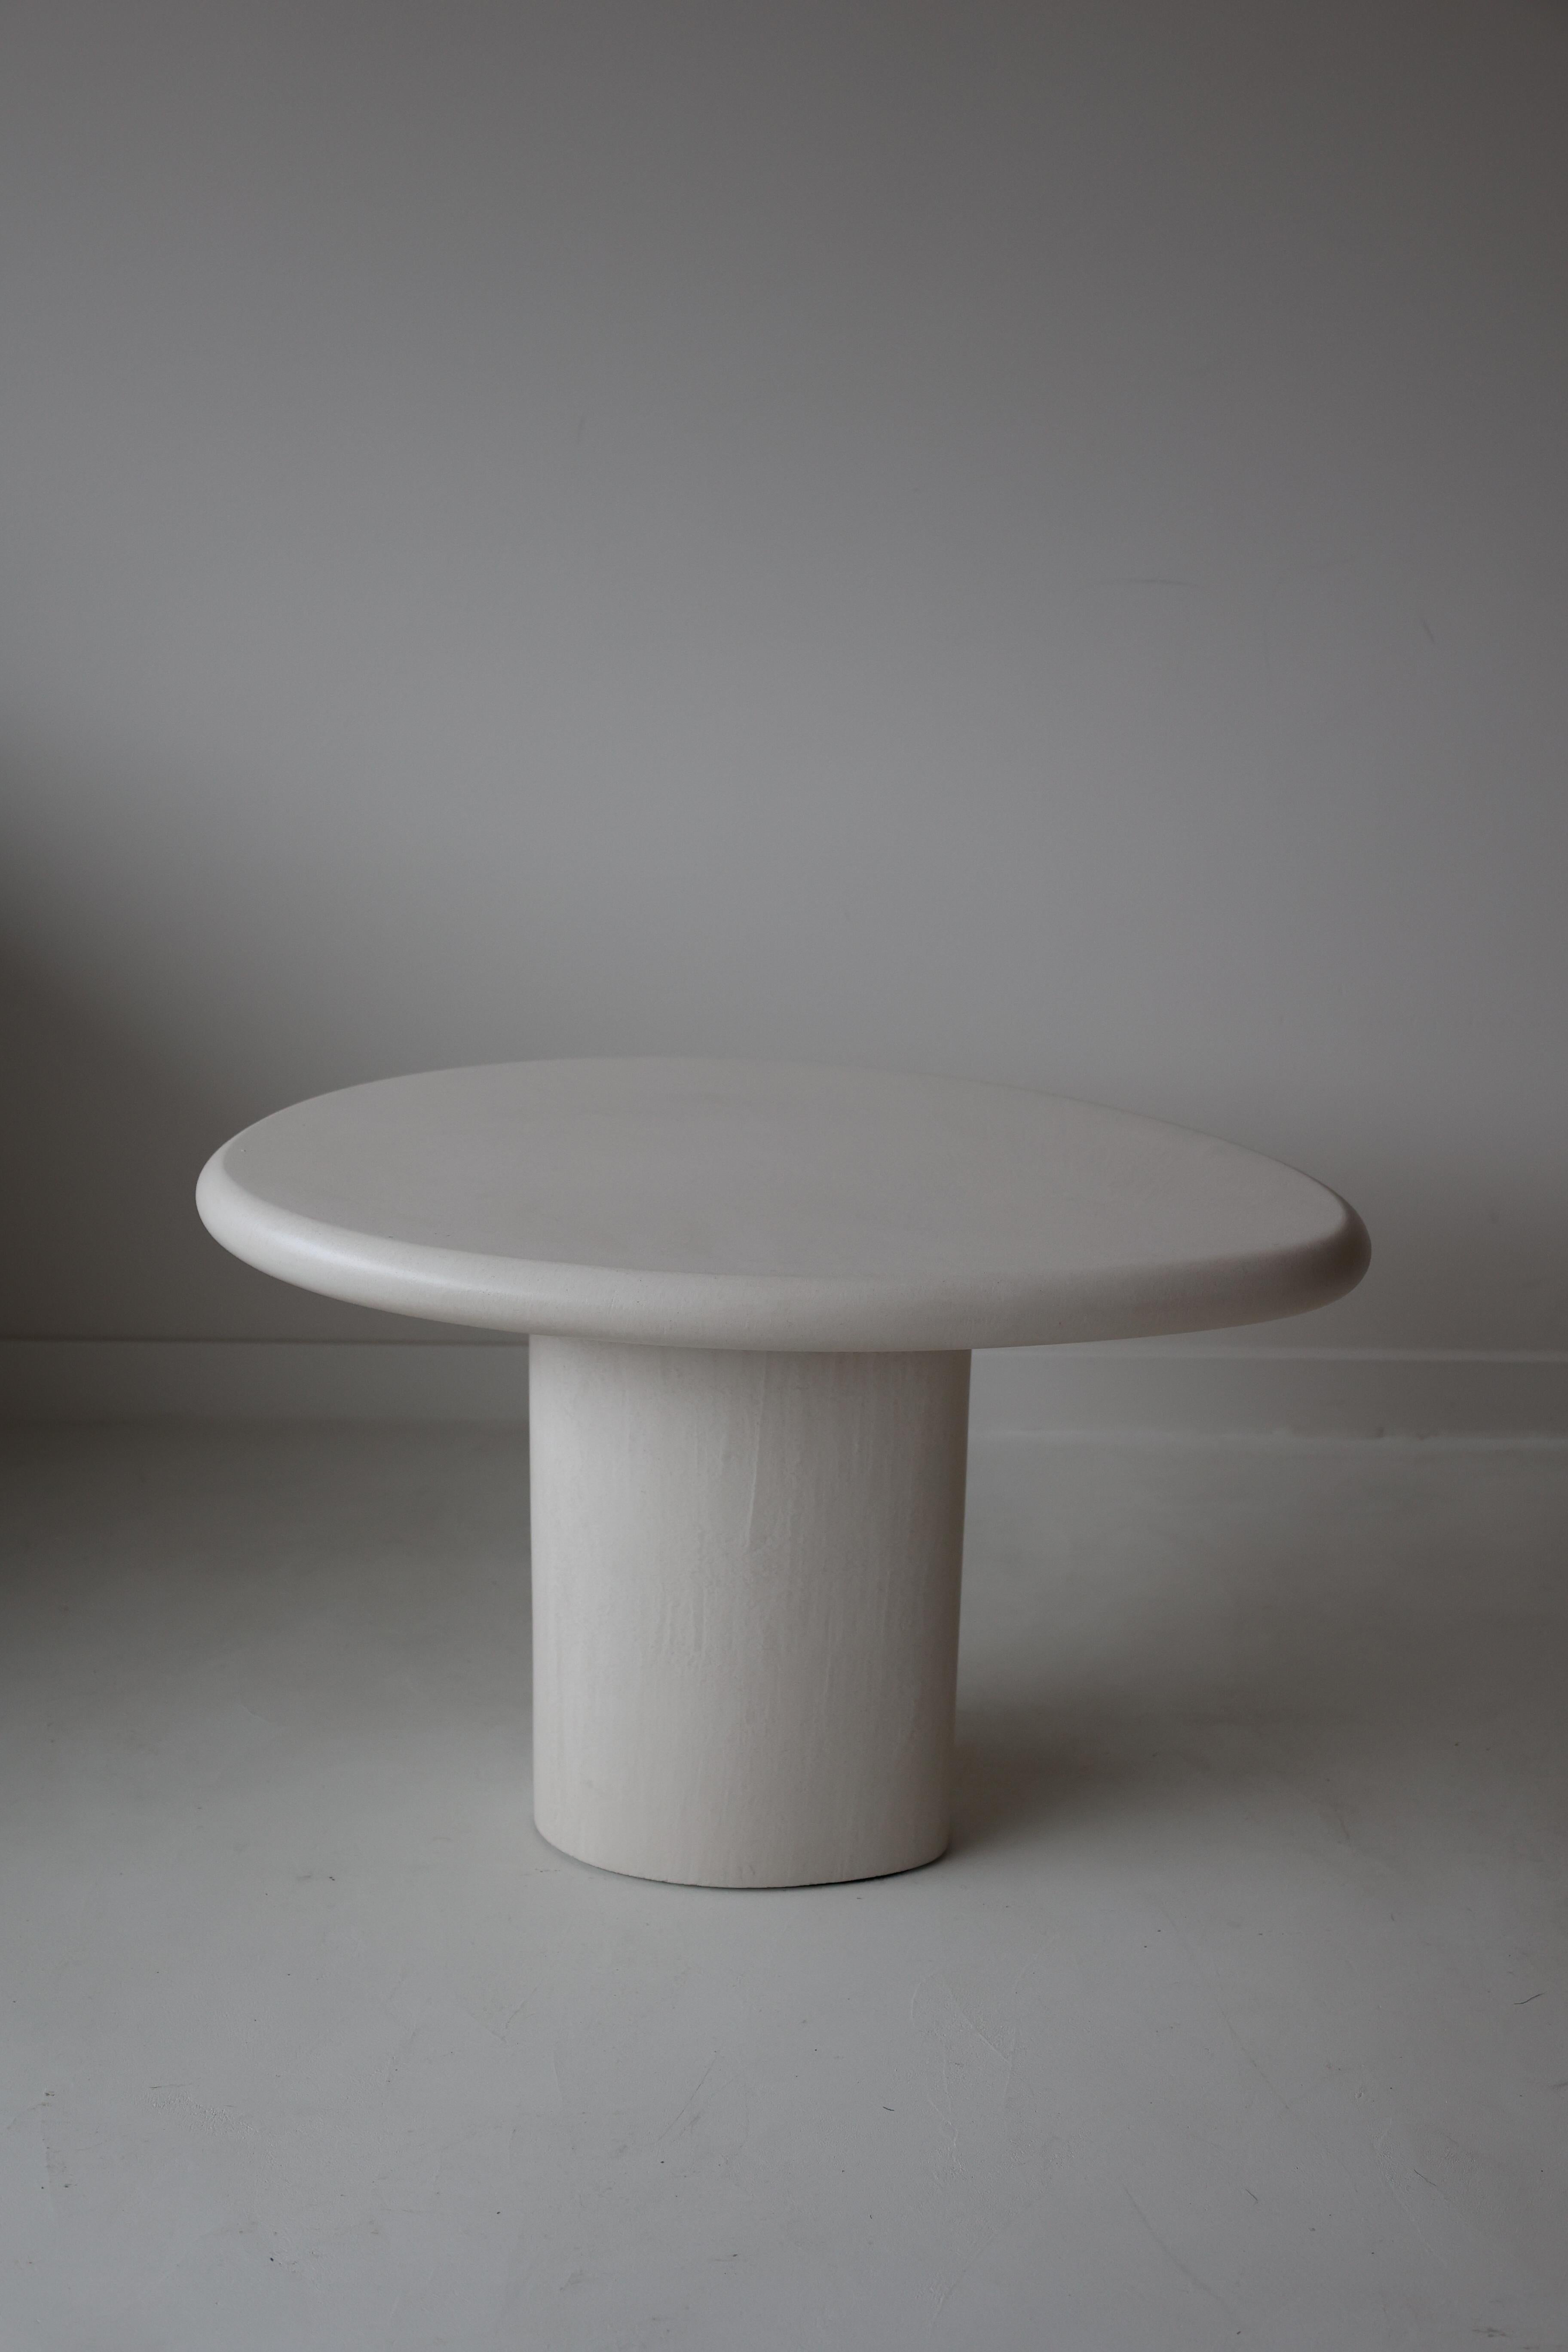 Adana Side Table by Kasanai
Dimensions: D 64 x W 43 x H 42 cm.
Materials: Lime plaster.
Also available in different colors. Please contact us.

Sometimes, simple is best. Adana follows the principle of minimalist simplicity with a pure, natural